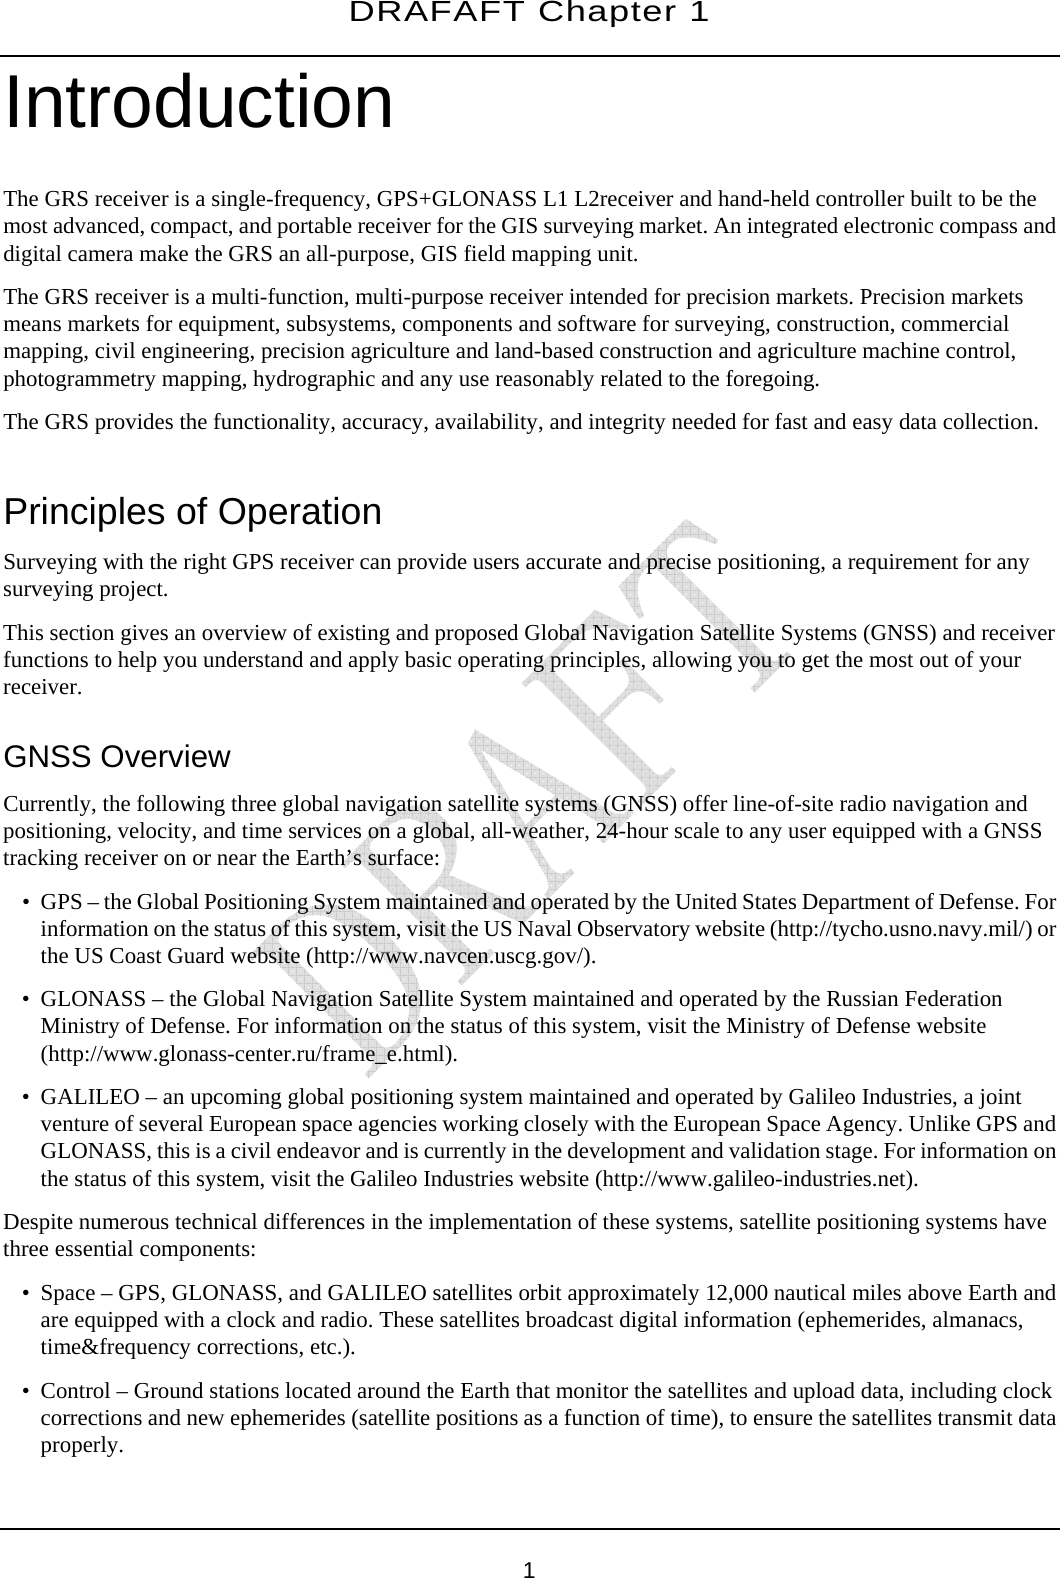 DRAFAFT Chapter 1       1 Introduction The GRS receiver is a single-frequency, GPS+GLONASS L1 L2receiver and hand-held controller built to be the most advanced, compact, and portable receiver for the GIS surveying market. An integrated electronic compass and digital camera make the GRS an all-purpose, GIS field mapping unit. The GRS receiver is a multi-function, multi-purpose receiver intended for precision markets. Precision markets means markets for equipment, subsystems, components and software for surveying, construction, commercial mapping, civil engineering, precision agriculture and land-based construction and agriculture machine control, photogrammetry mapping, hydrographic and any use reasonably related to the foregoing. The GRS provides the functionality, accuracy, availability, and integrity needed for fast and easy data collection.  Principles of Operation Surveying with the right GPS receiver can provide users accurate and precise positioning, a requirement for any surveying project. This section gives an overview of existing and proposed Global Navigation Satellite Systems (GNSS) and receiver functions to help you understand and apply basic operating principles, allowing you to get the most out of your receiver. GNSS Overview Currently, the following three global navigation satellite systems (GNSS) offer line-of-site radio navigation and positioning, velocity, and time services on a global, all-weather, 24-hour scale to any user equipped with a GNSS tracking receiver on or near the Earth’s surface: • GPS – the Global Positioning System maintained and operated by the United States Department of Defense. For information on the status of this system, visit the US Naval Observatory website (http://tycho.usno.navy.mil/) or the US Coast Guard website (http://www.navcen.uscg.gov/). • GLONASS – the Global Navigation Satellite System maintained and operated by the Russian Federation Ministry of Defense. For information on the status of this system, visit the Ministry of Defense website (http://www.glonass-center.ru/frame_e.html). • GALILEO – an upcoming global positioning system maintained and operated by Galileo Industries, a joint venture of several European space agencies working closely with the European Space Agency. Unlike GPS and GLONASS, this is a civil endeavor and is currently in the development and validation stage. For information on the status of this system, visit the Galileo Industries website (http://www.galileo-industries.net). Despite numerous technical differences in the implementation of these systems, satellite positioning systems have three essential components: • Space – GPS, GLONASS, and GALILEO satellites orbit approximately 12,000 nautical miles above Earth and are equipped with a clock and radio. These satellites broadcast digital information (ephemerides, almanacs, time&amp;frequency corrections, etc.). • Control – Ground stations located around the Earth that monitor the satellites and upload data, including clock corrections and new ephemerides (satellite positions as a function of time), to ensure the satellites transmit data properly. 